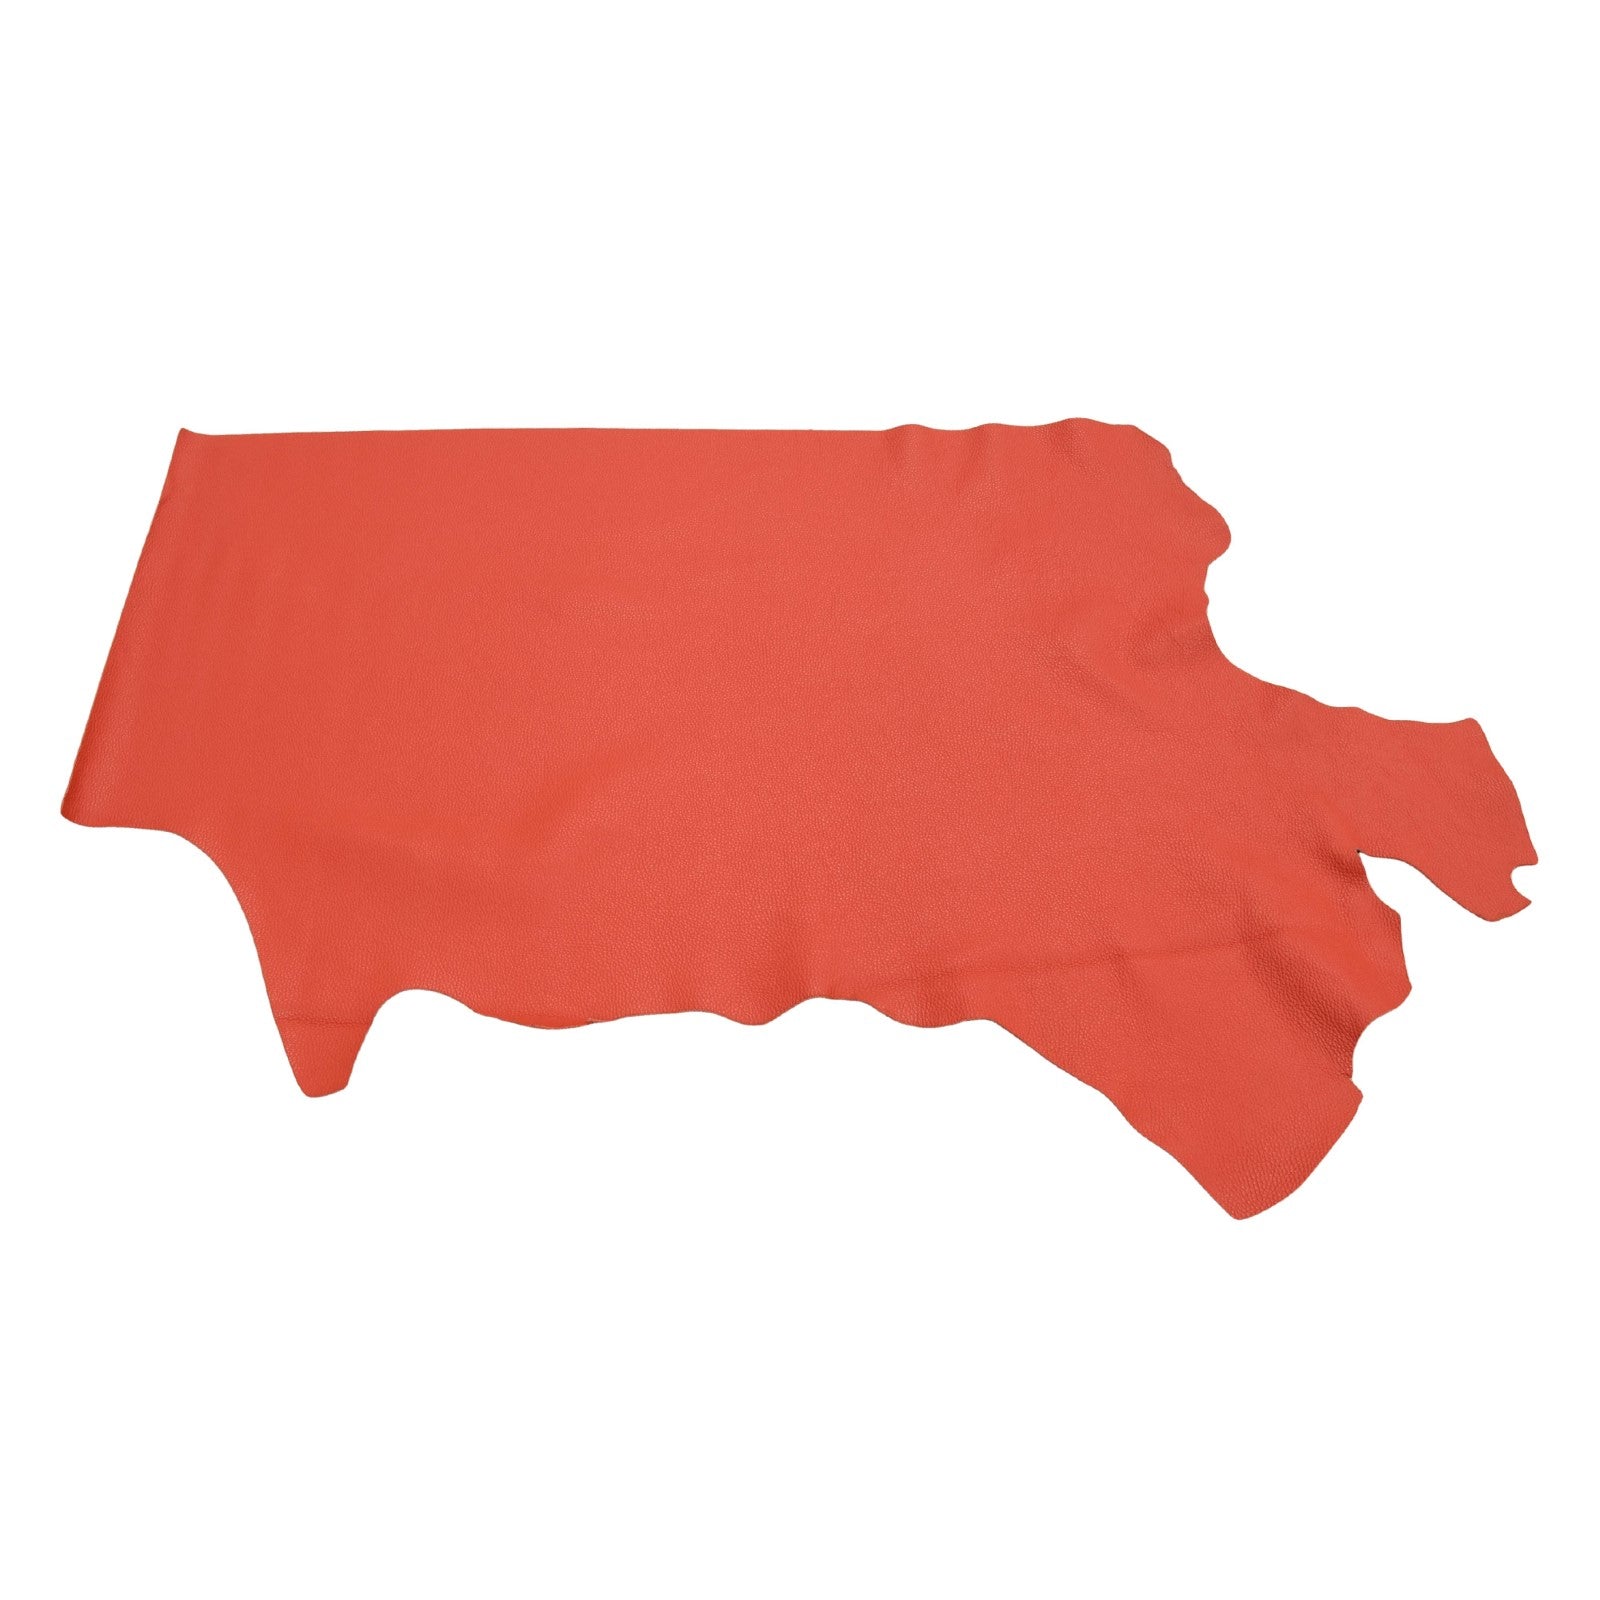 Big Apple Red Tried n True 3-4 oz Leather Cow Hides, Bottom Piece / 6.5-7.5 Square Foot | The Leather Guy